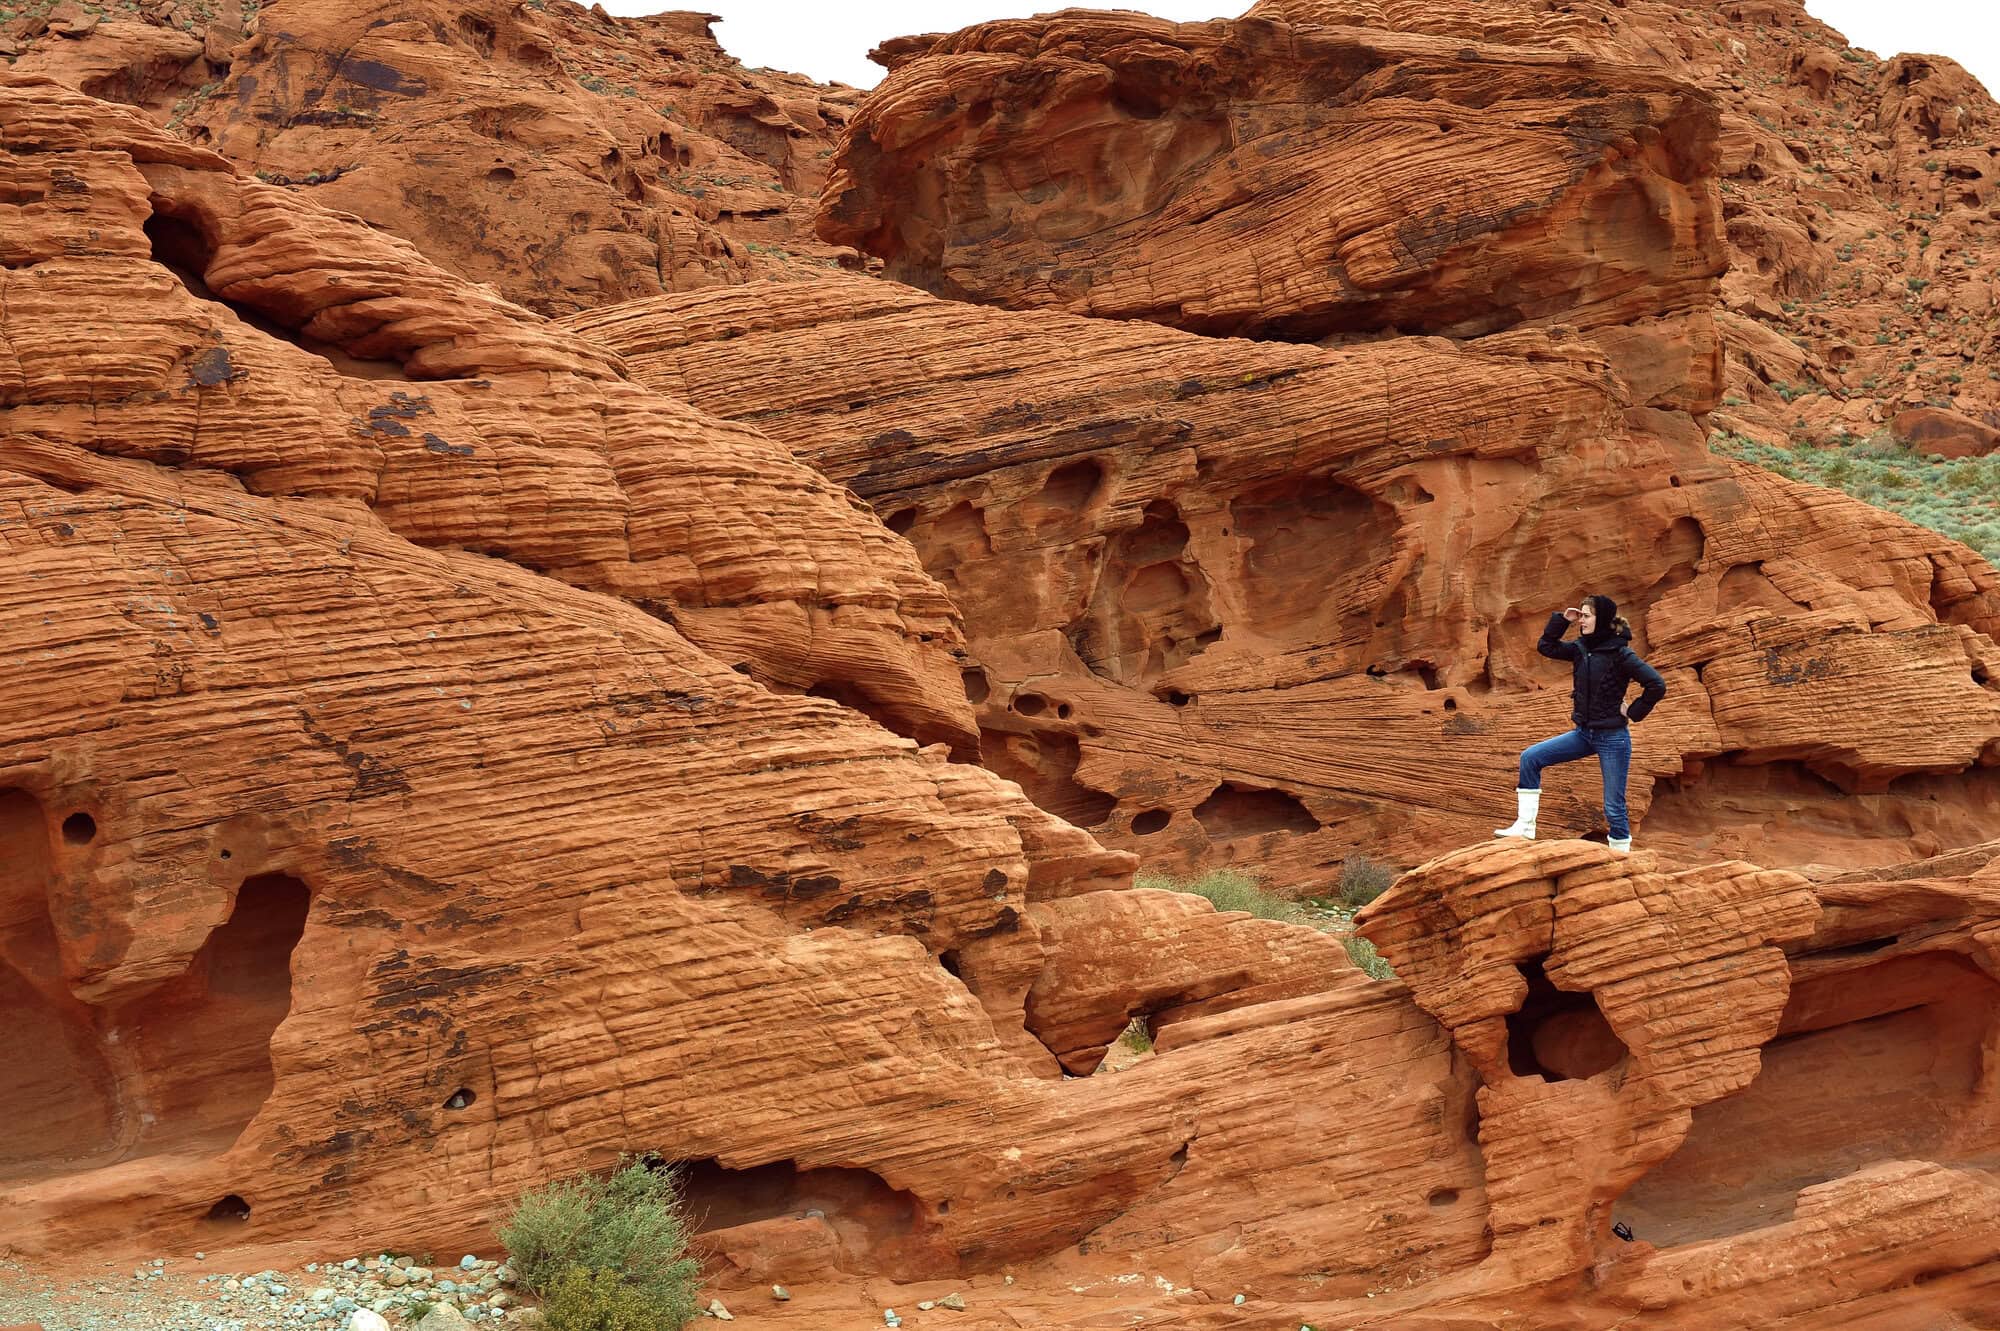 <p>Last on this list for a reason, Nevada will continue to be popular for spring, fall, or winter trips. While you’ll need to avoid the extreme summer heat, you’ll know it won’t become the next Atlantis.</p> <p>Consider a road trip outside Las Vegas along I-15 to Valley of Fire State Park. The 100-mile round trip drive and 40,000-acre state park are perfectly sized for a day trip. See for yourself why this otherworldly place is the filming location for faraway lands in movies like Star Trek and how the sun’s rays on red sandstone rocks illuminate the valley like fire.</p>